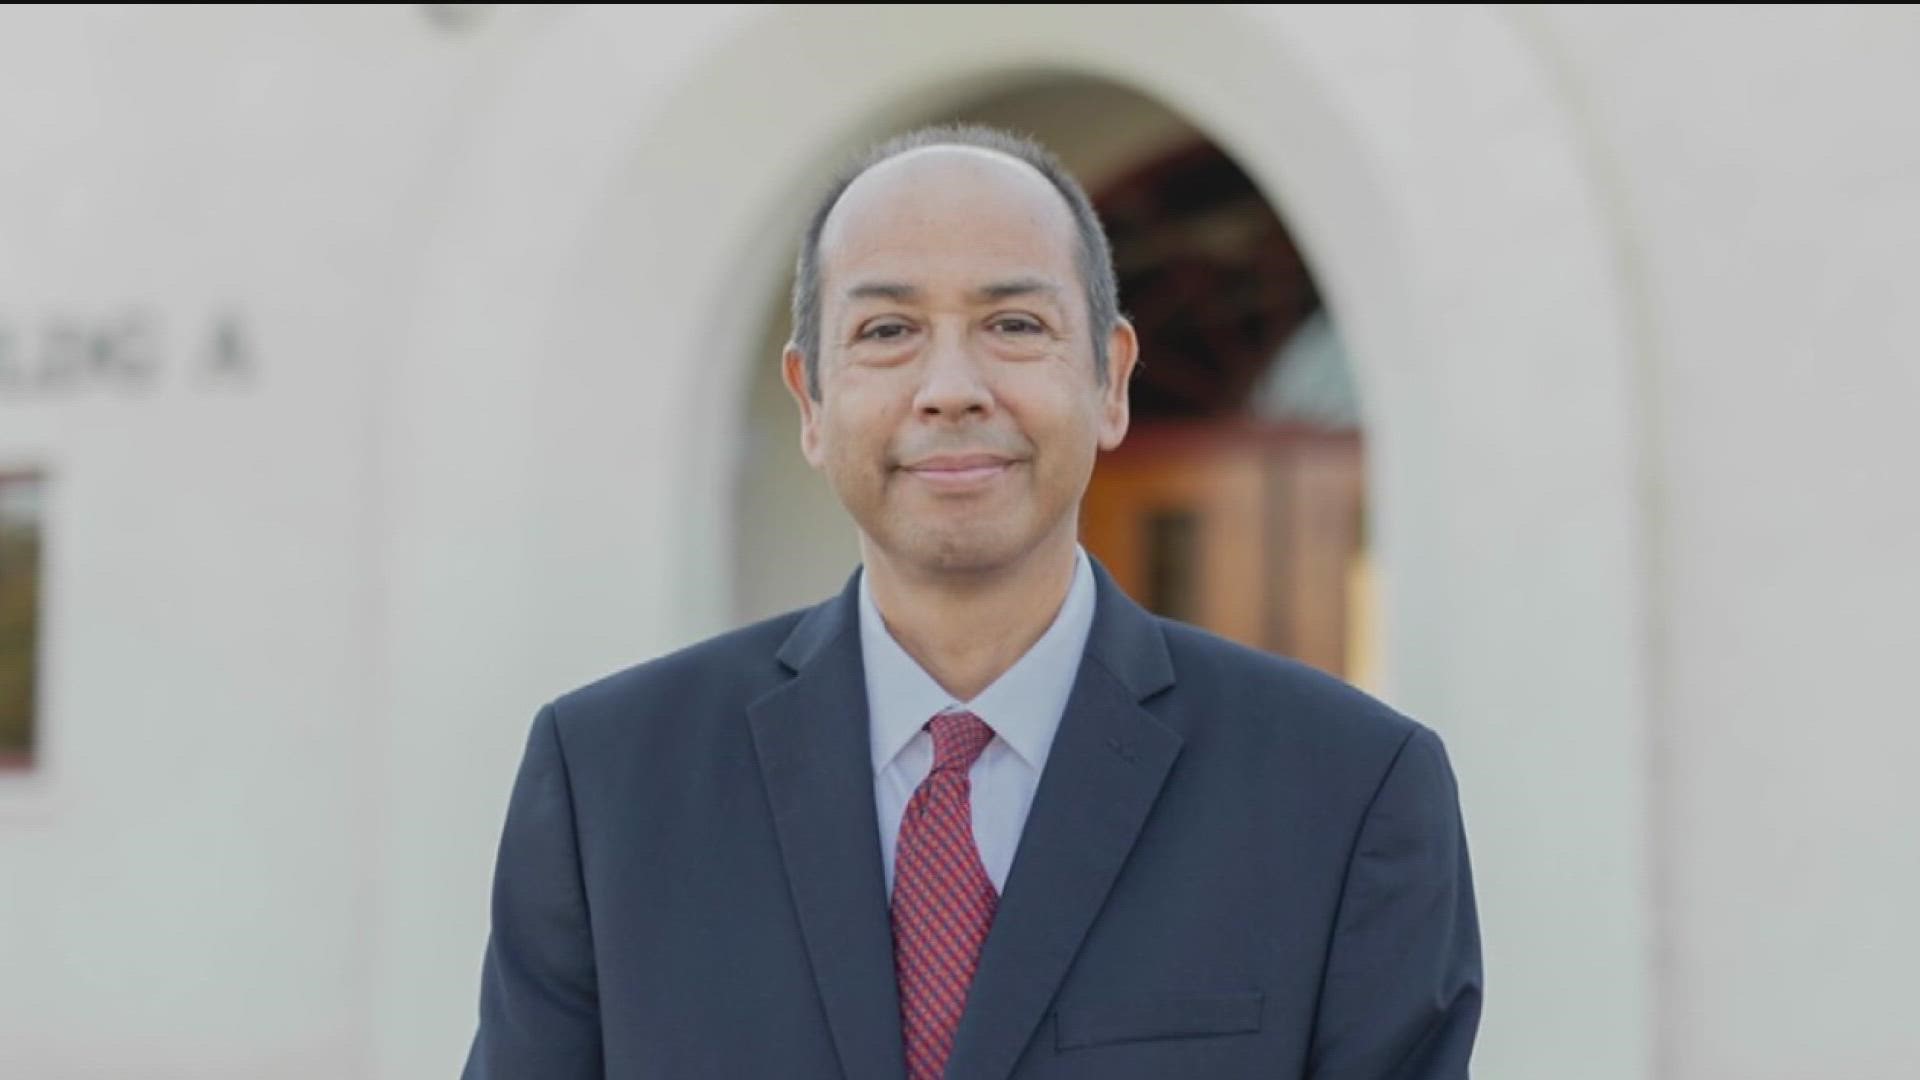 Chula Vista officials will now prepare for a special election estimated at $2M, since a man who died in September was elected to office.